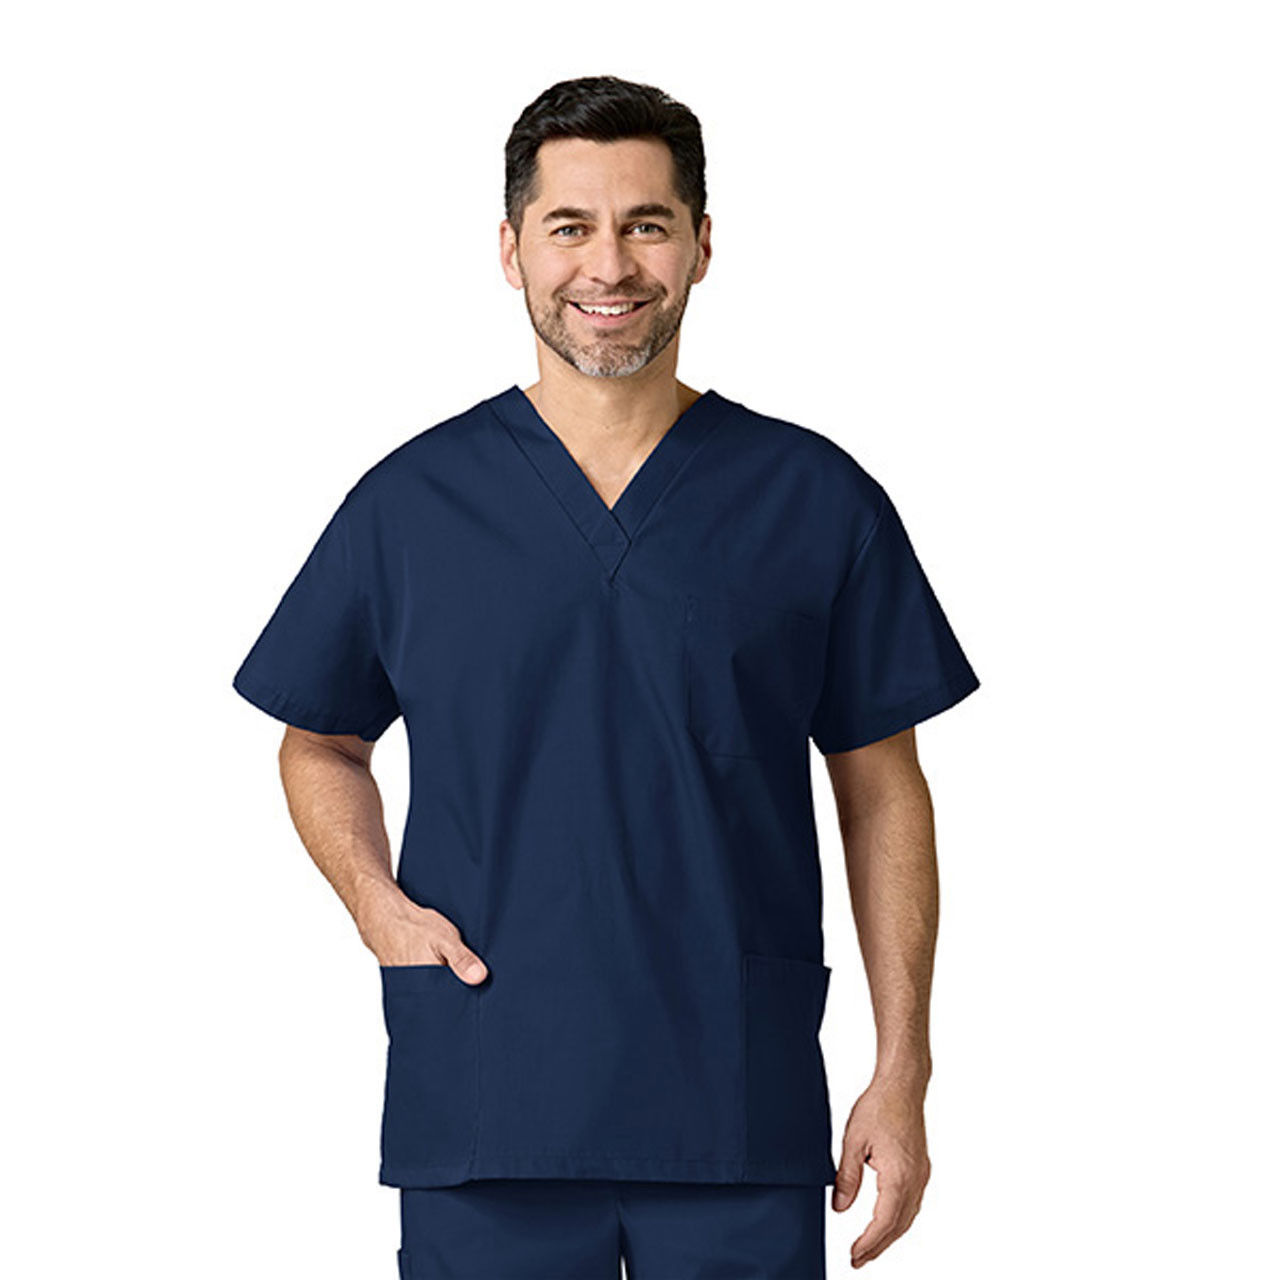 What material is the Navy Blue Scrub Top made from?